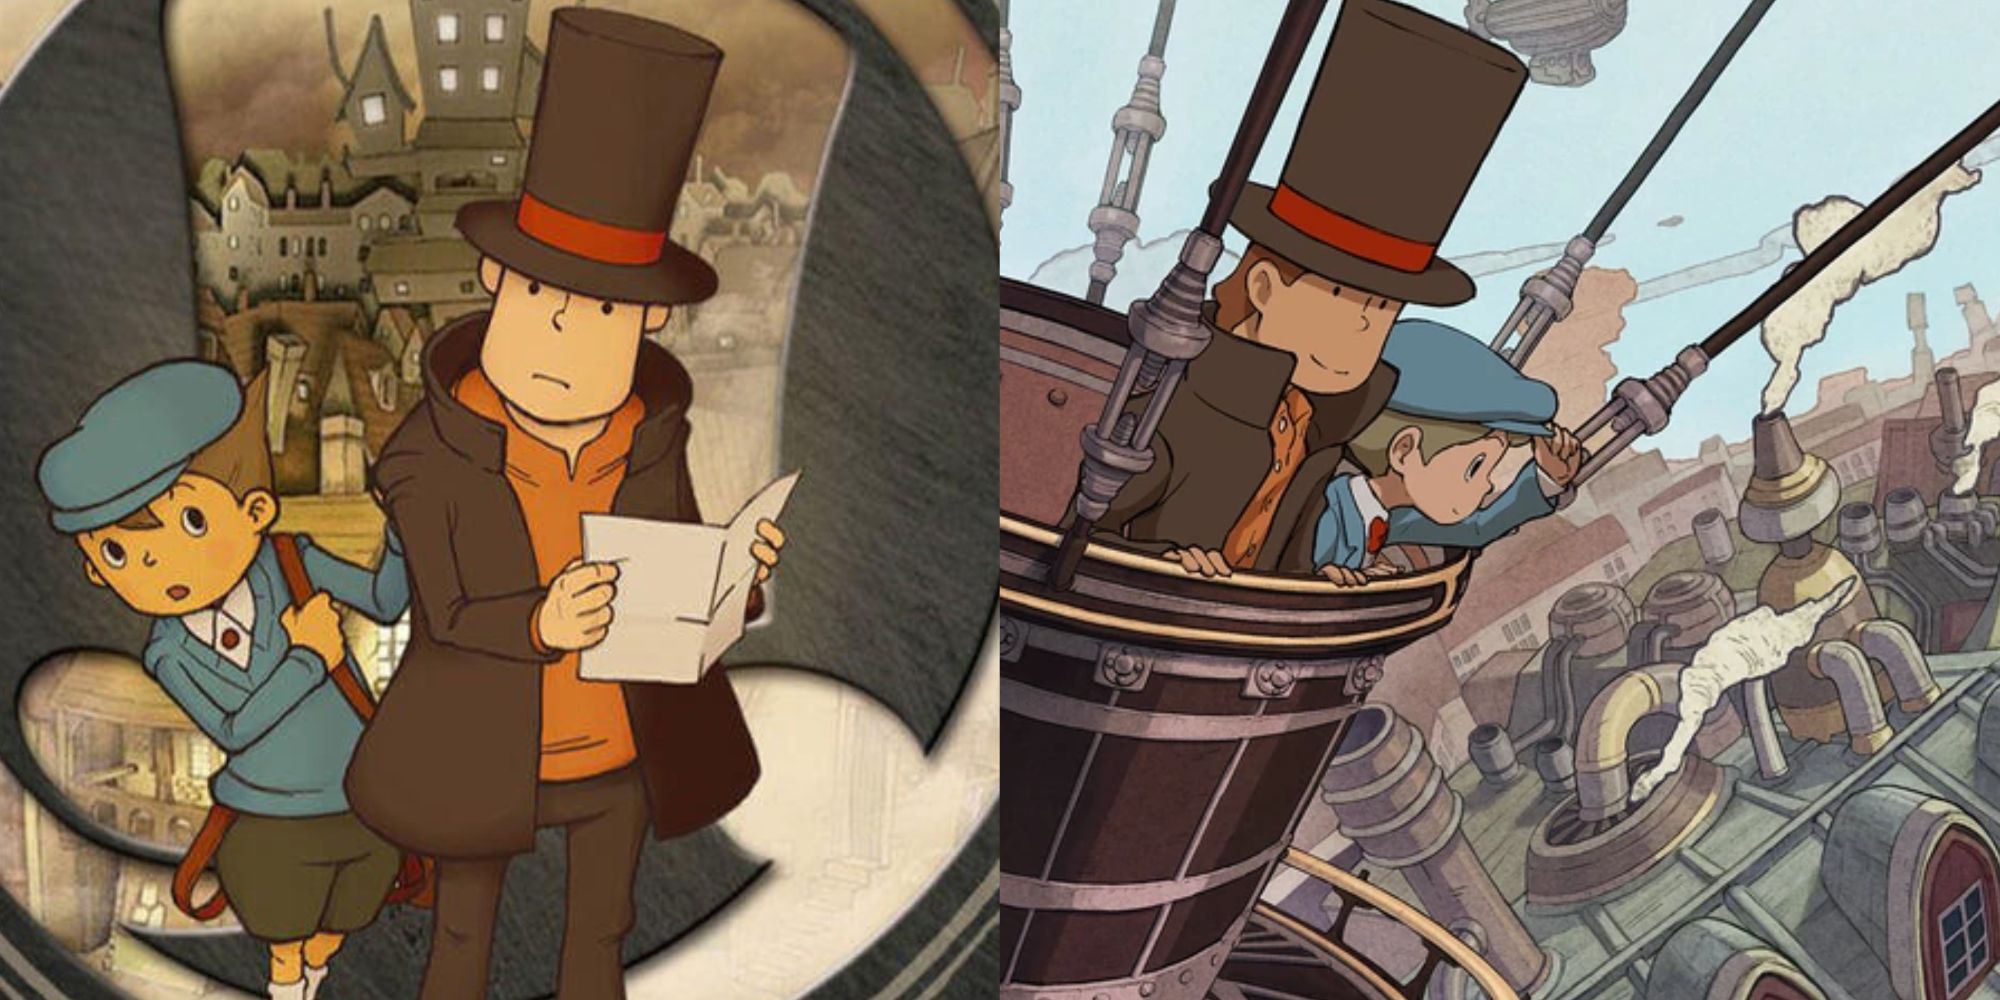 Professor Layton: Things You Dind't Know About The Series